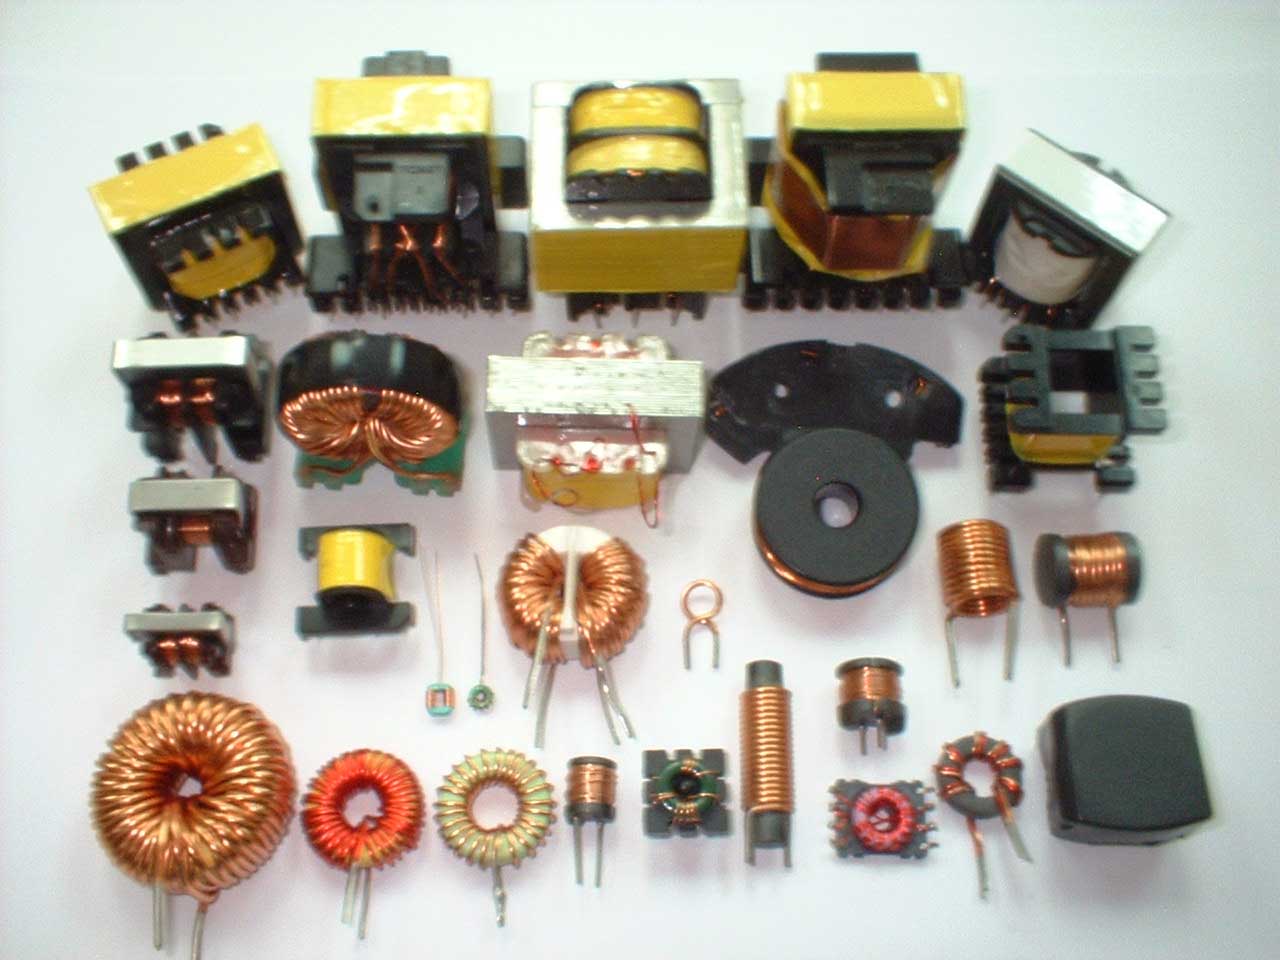 Design of two winding transformer and inductor for switching power supplies